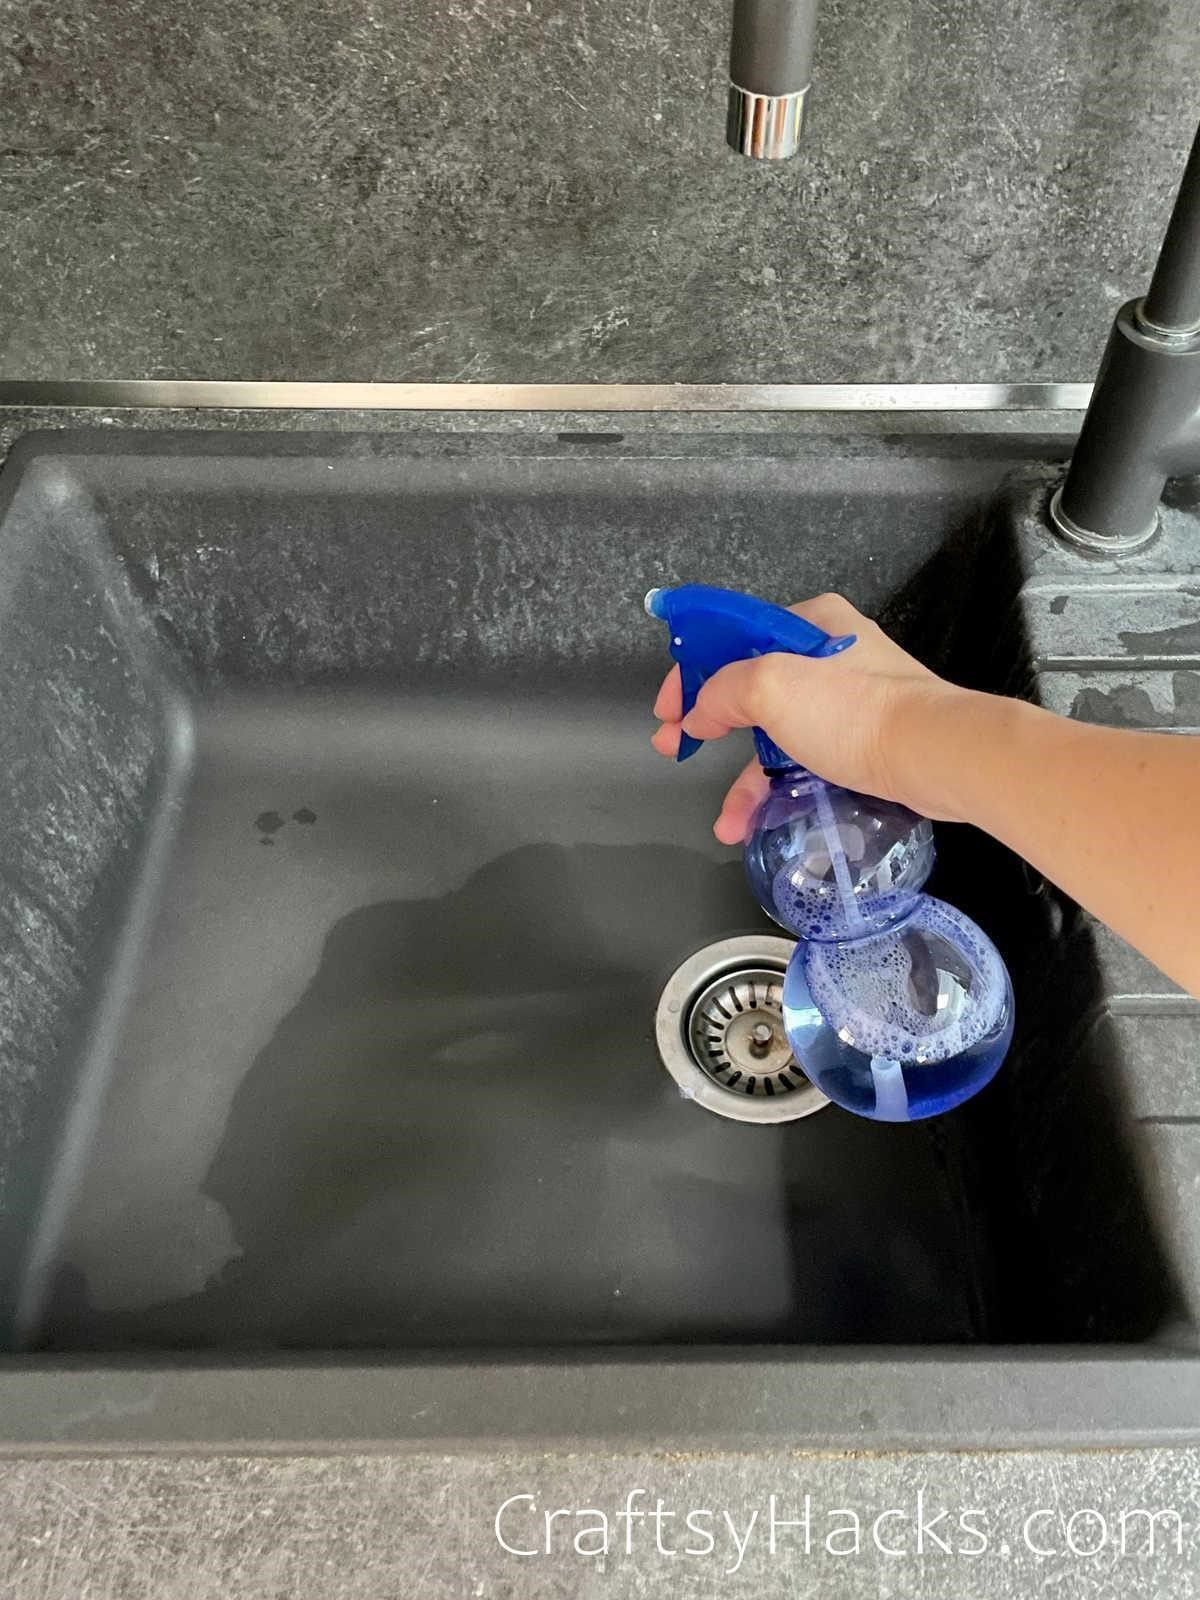 clean and disinfect kitchen sink